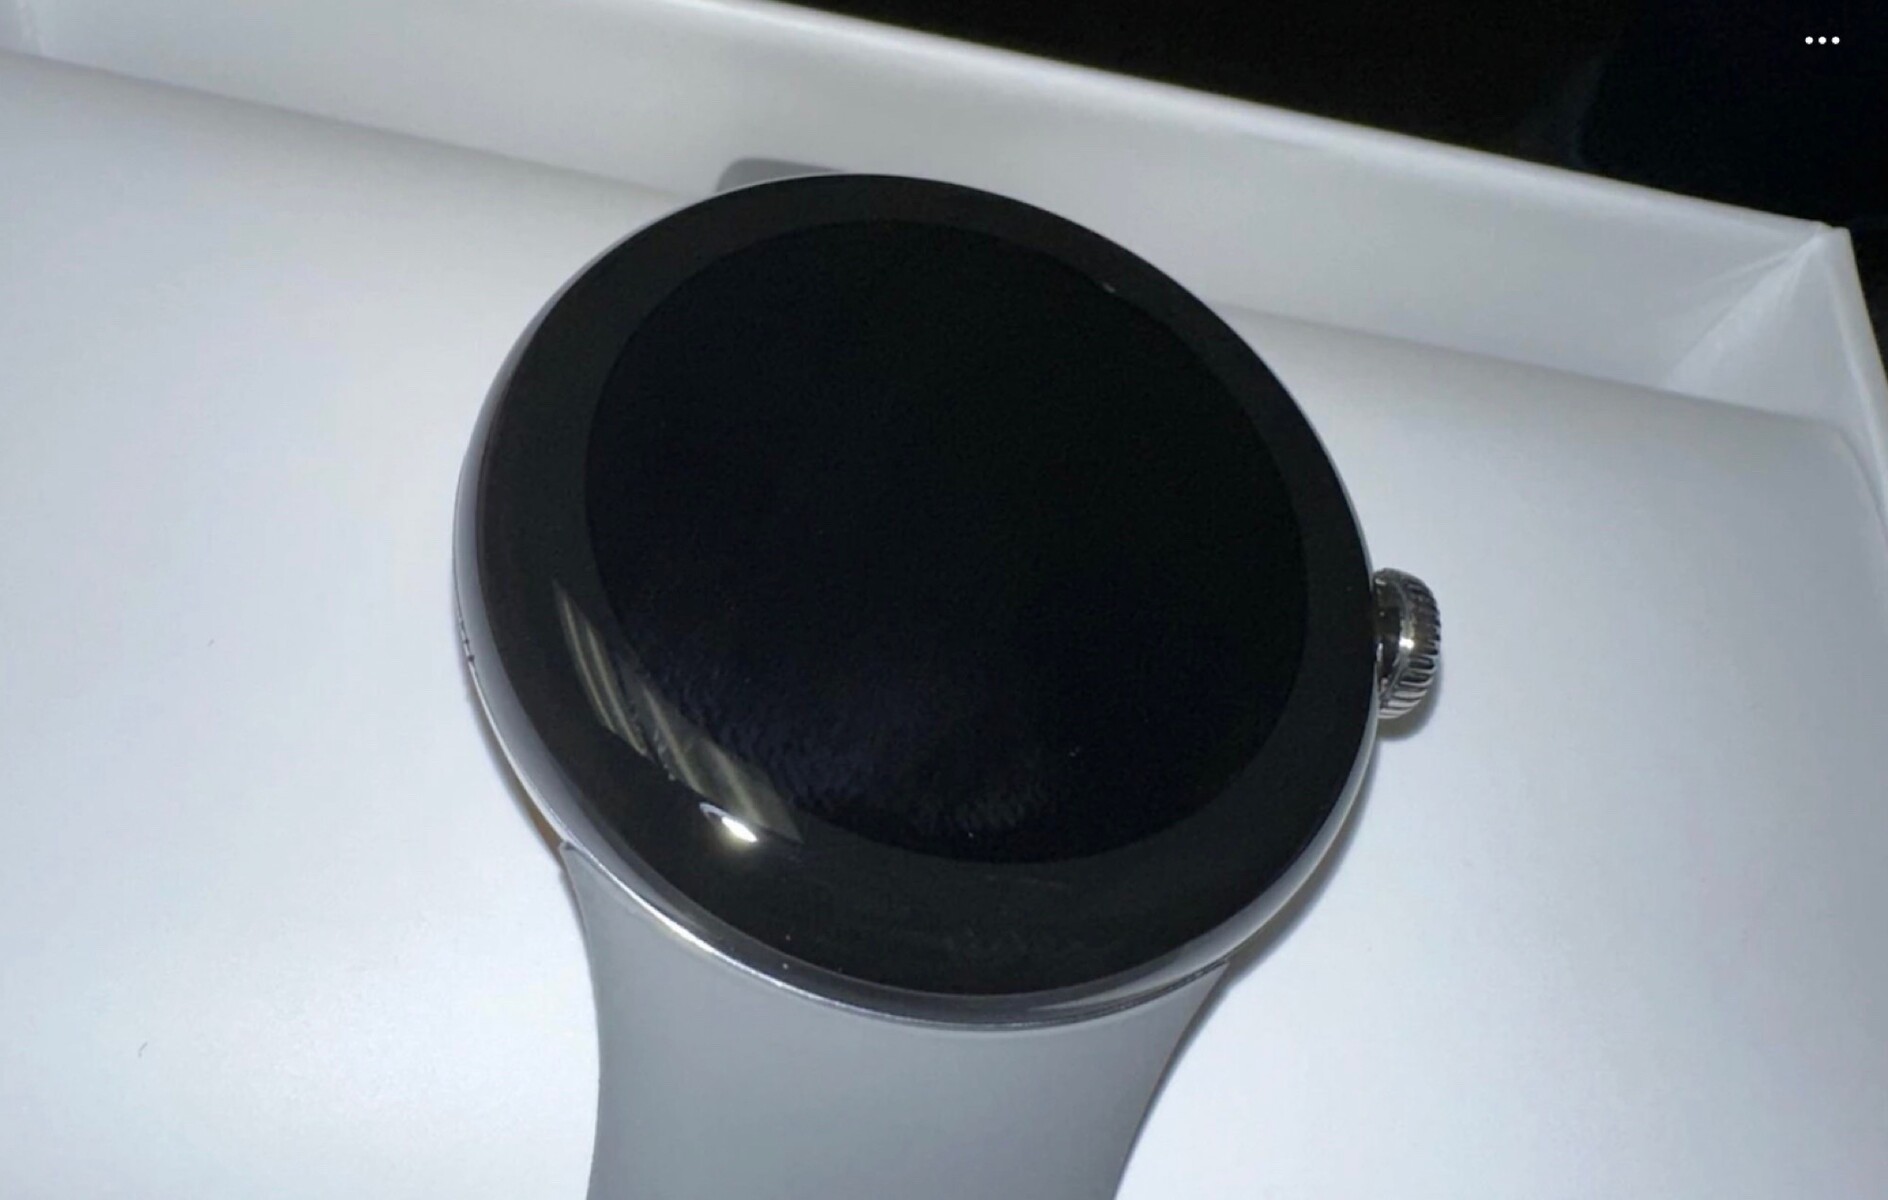 Google Pixel Watch: band watch show as Unboxing photos leak - News bezels prices thick display NotebookCheck.net